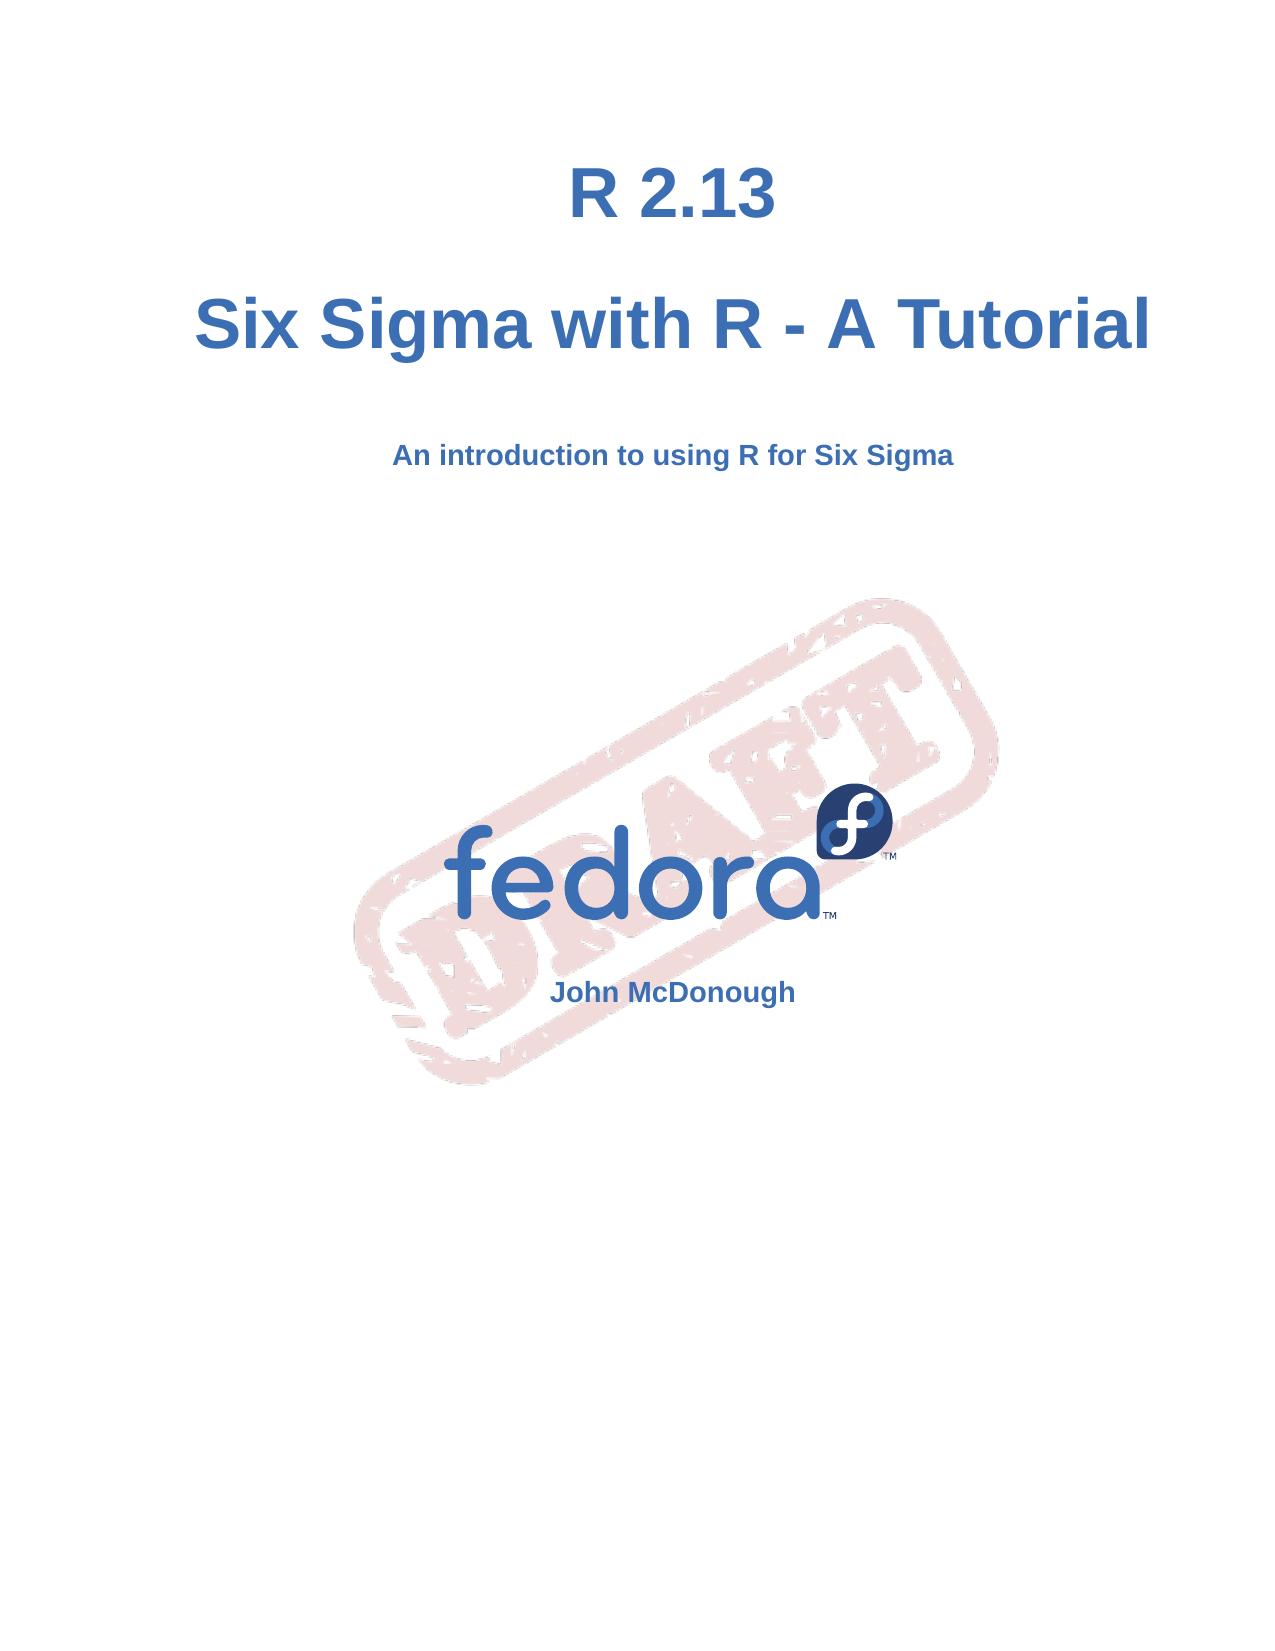 Six Sigma with R - A Tutorial - An introduction to using R for Six Sigma